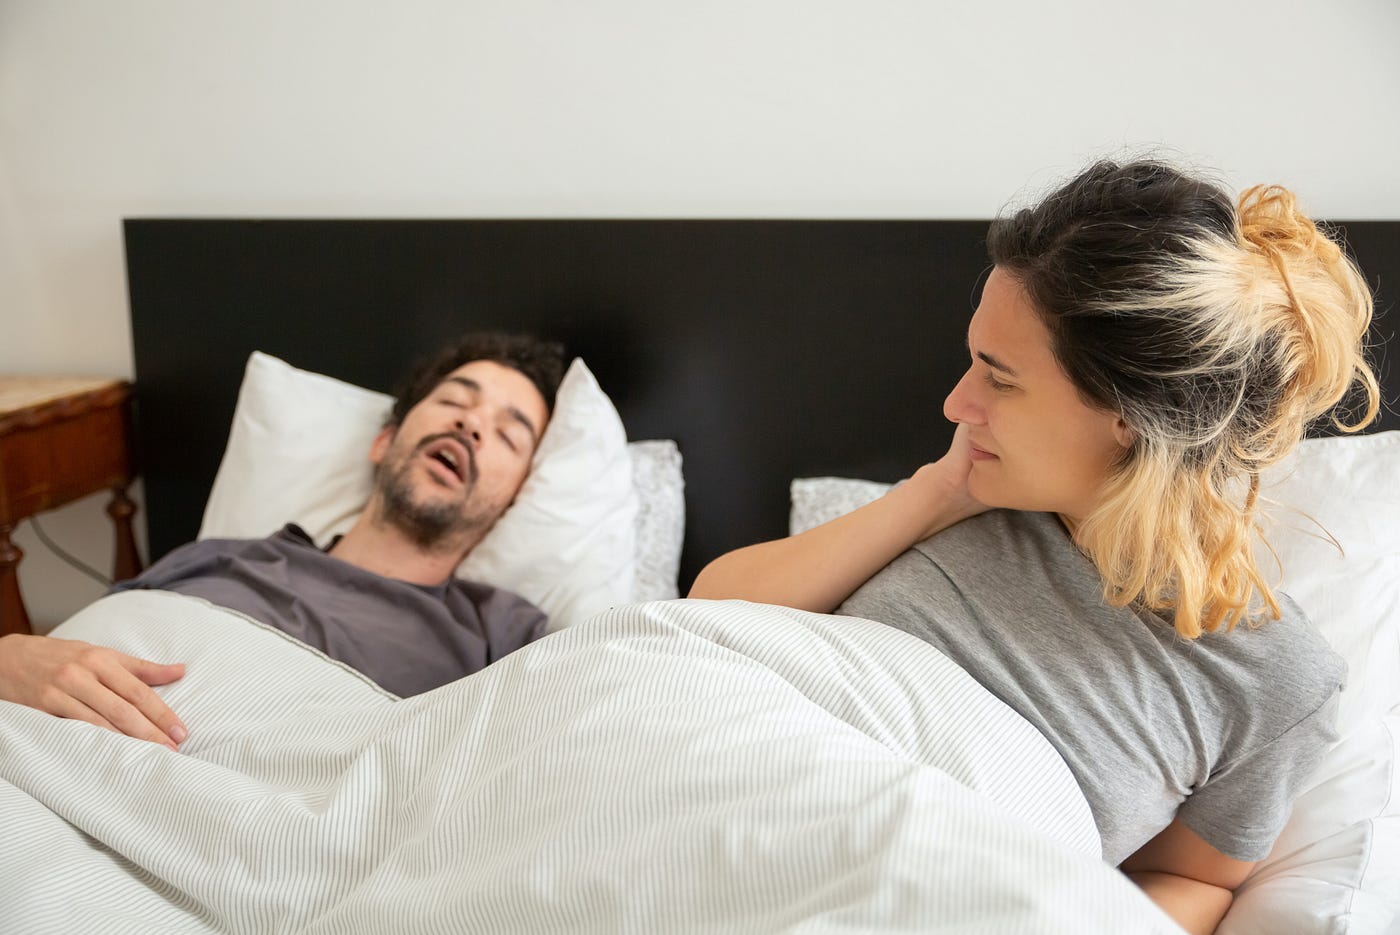 Should Couples Have A “Sex Bed” And A “Sleep Bed?” by Carlyn Beccia Sexography Medium